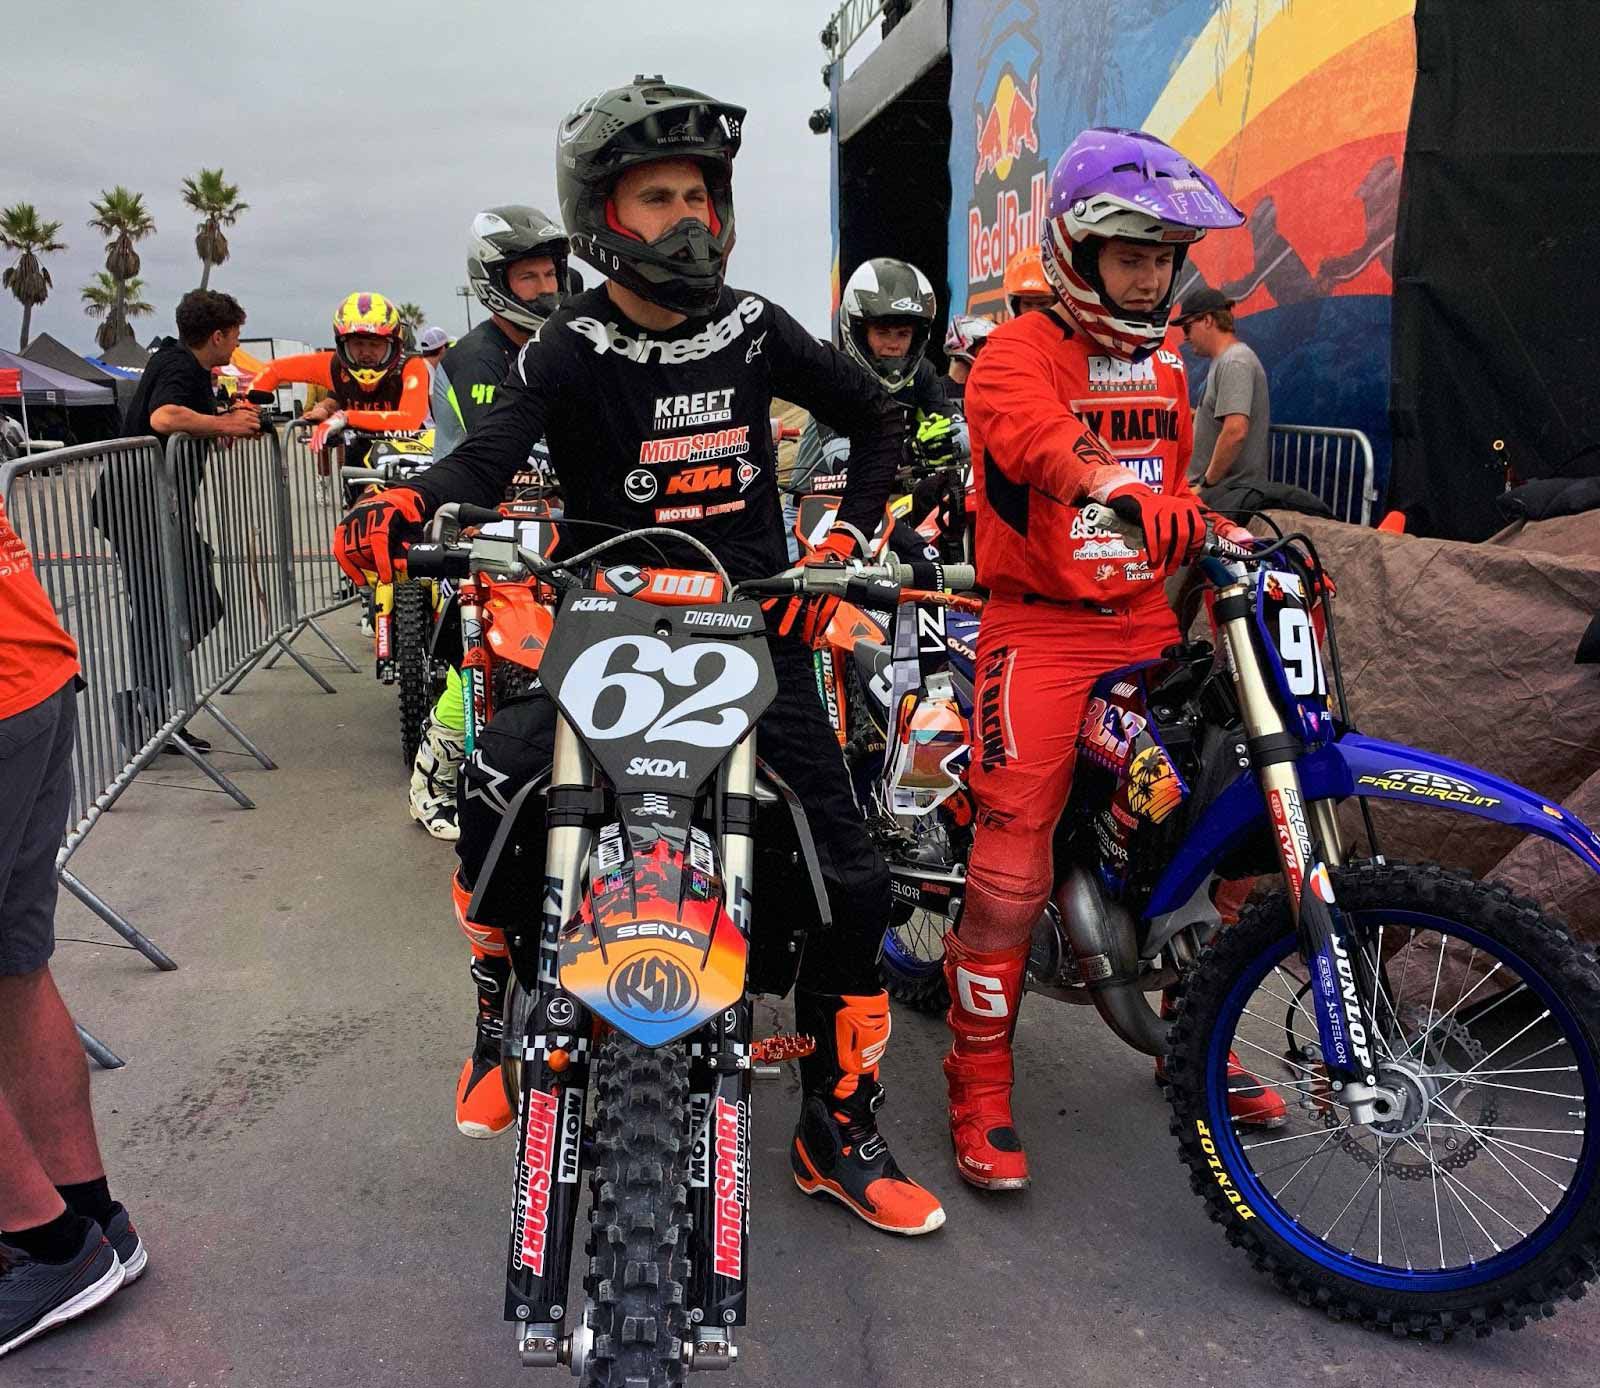 Andy Dibrino and Carson Brown lined up to ascend the ramp for practice runs on Red Bull’s Straight Rhythm.